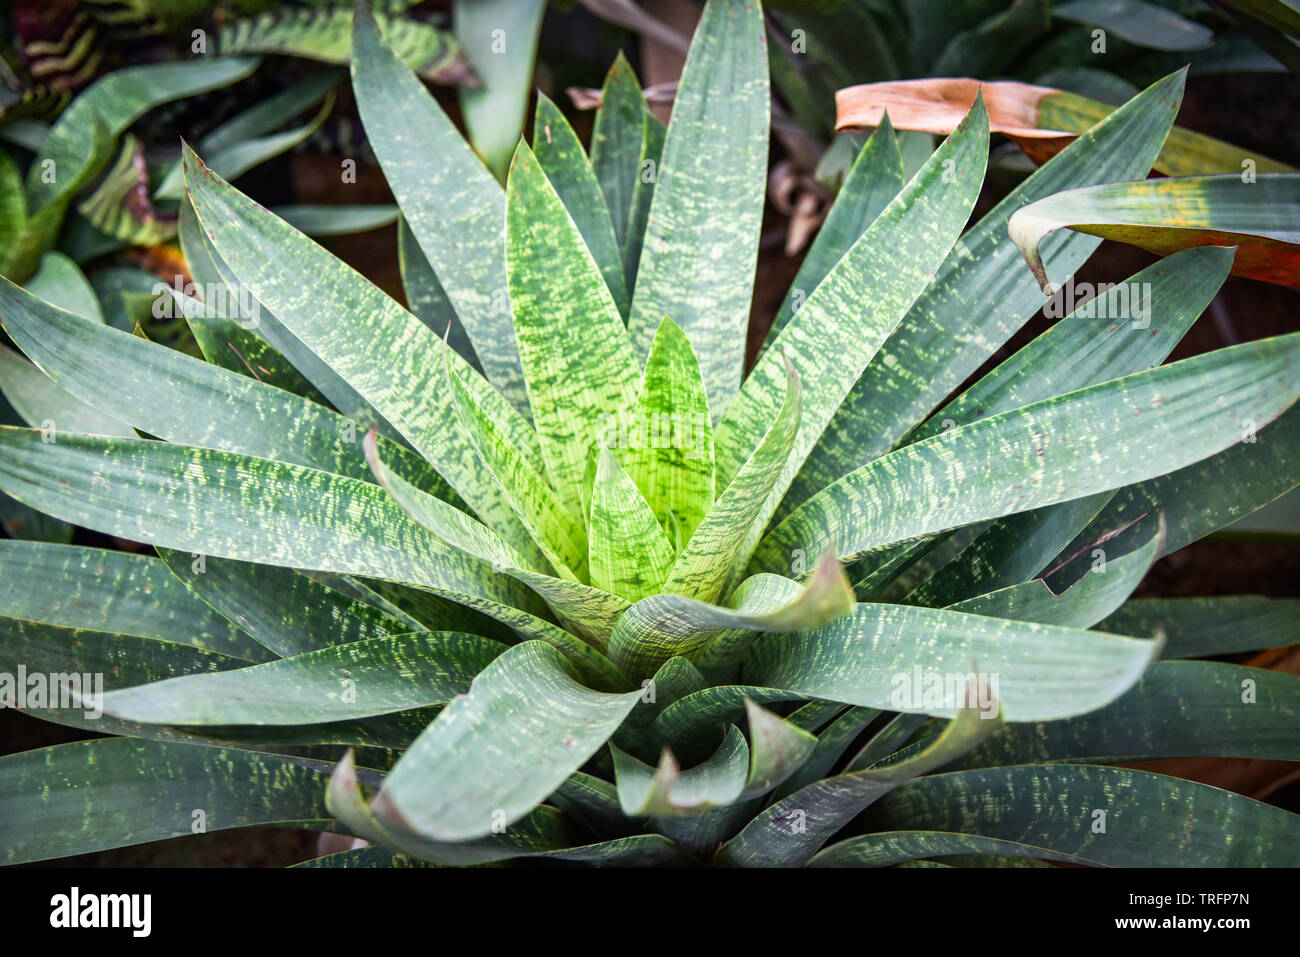 Striped bromeliad green leaves large in the bromeliad garden Stock Photo